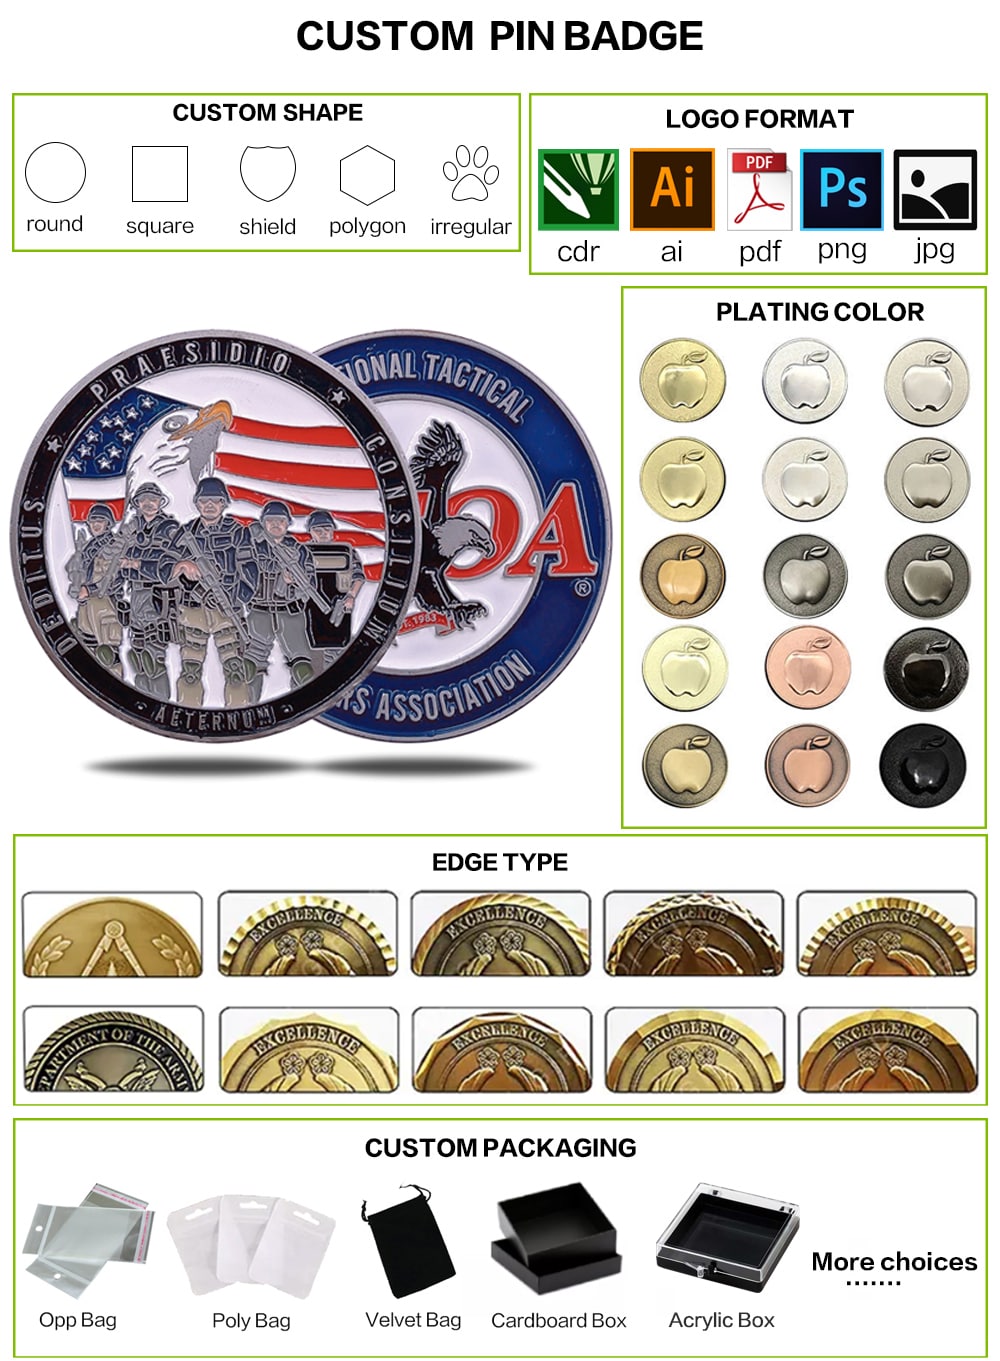 Cut-out military challenge coins